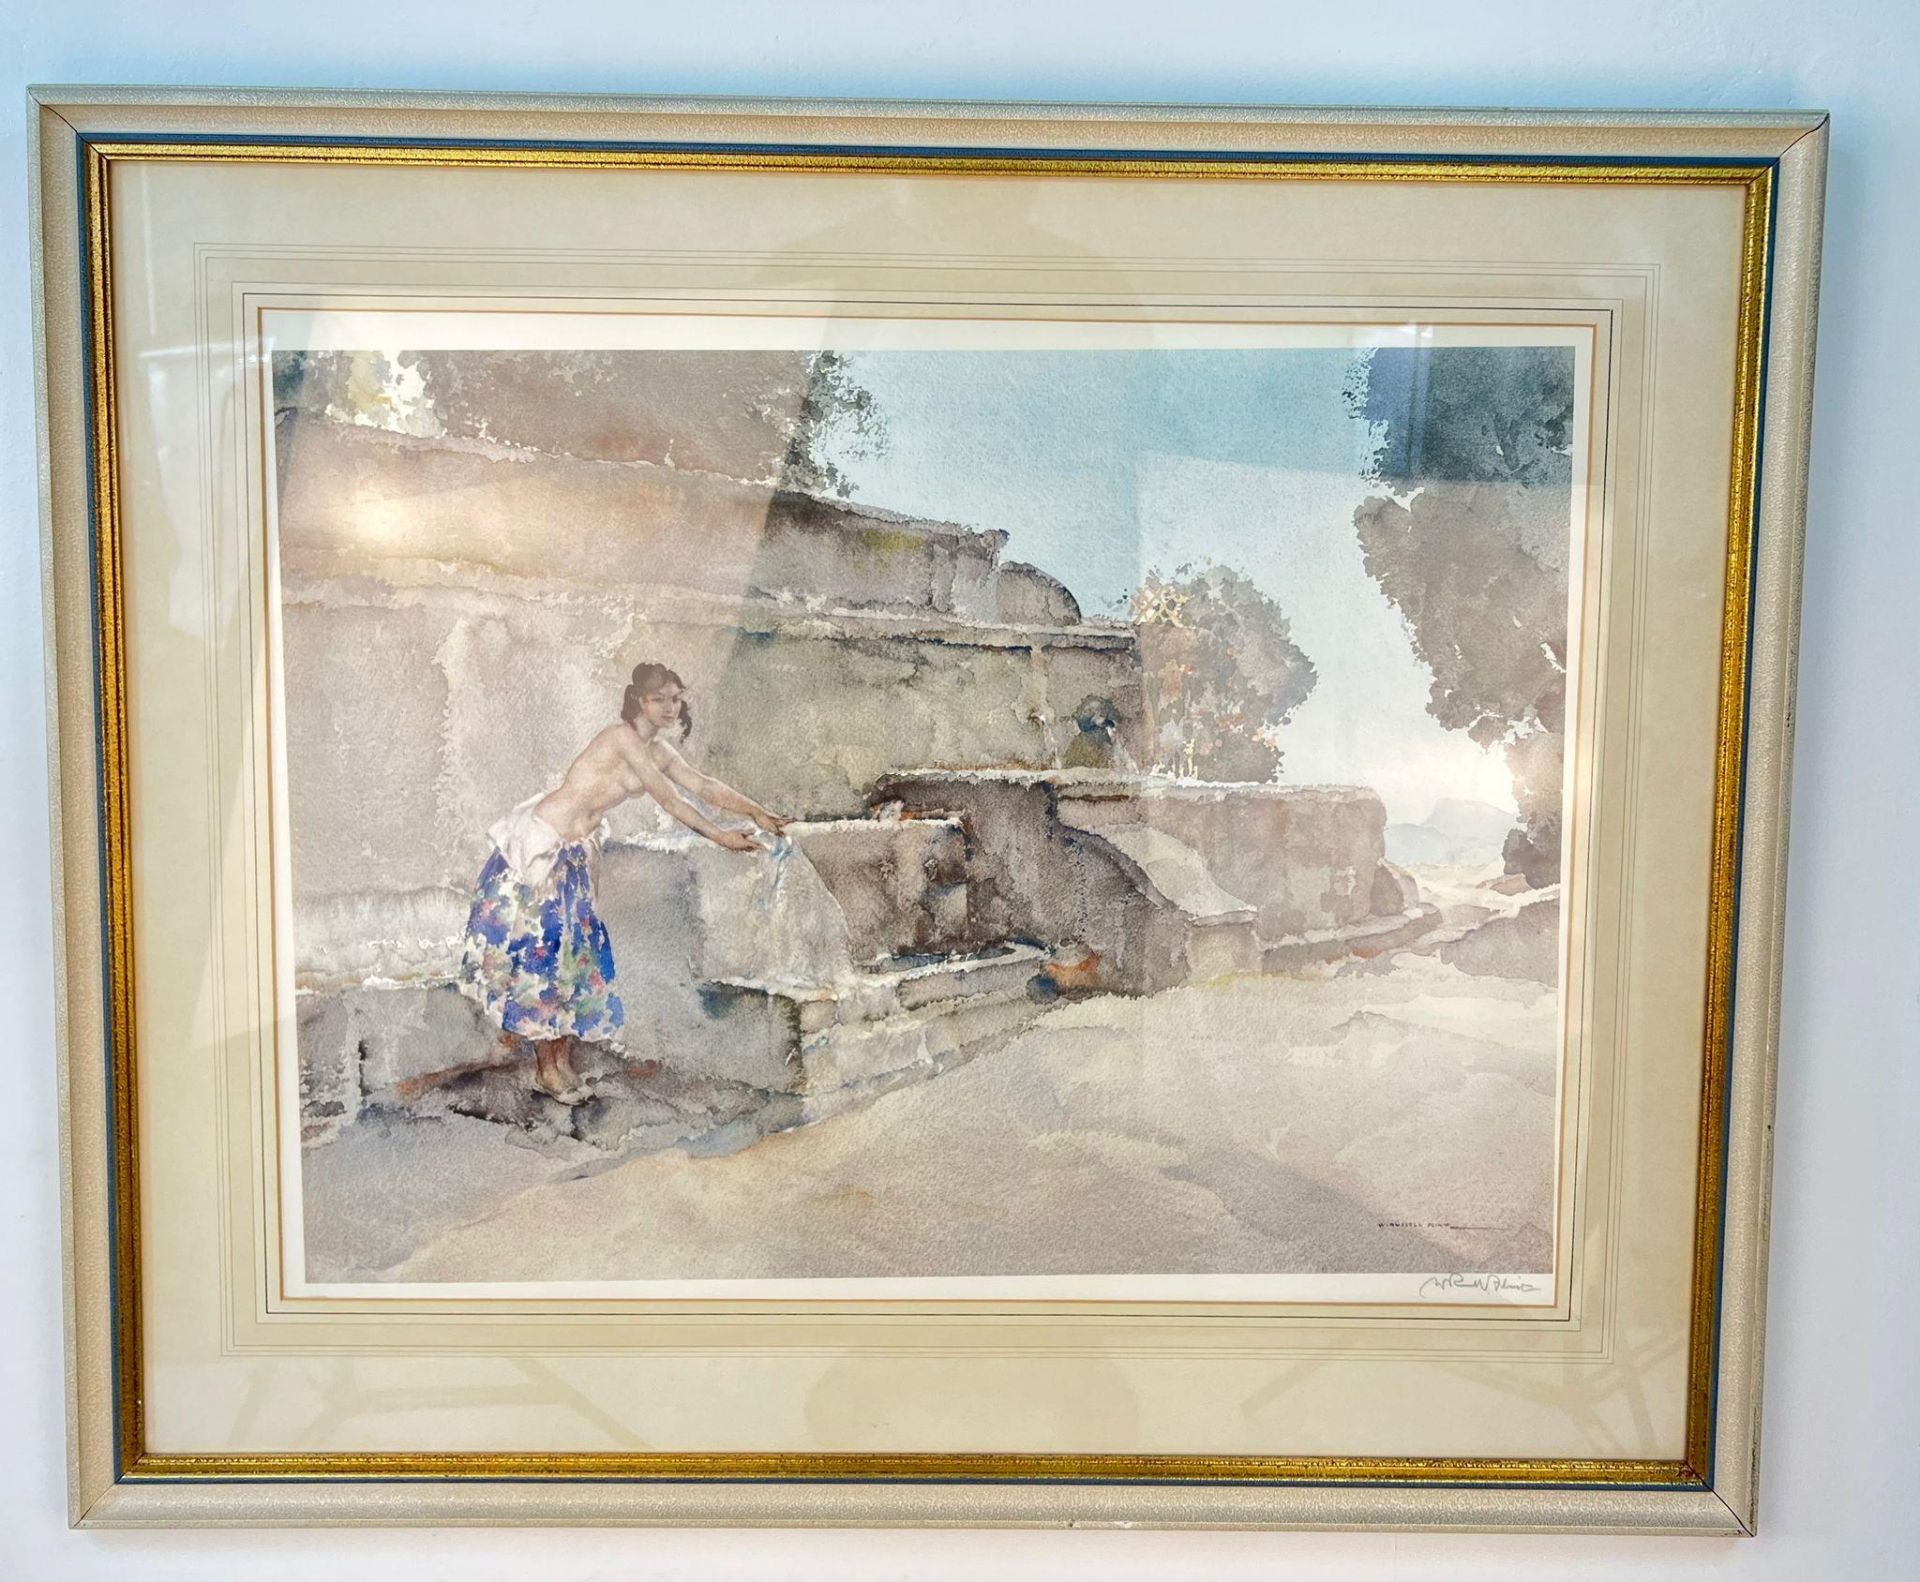 AN ORIGINAL WATER COLOUR OF THE FAMOUS "AT THE WALL, ISABELLE AT LUCENAY" BY SIR WILLIAM RUSSELL - Image 2 of 6